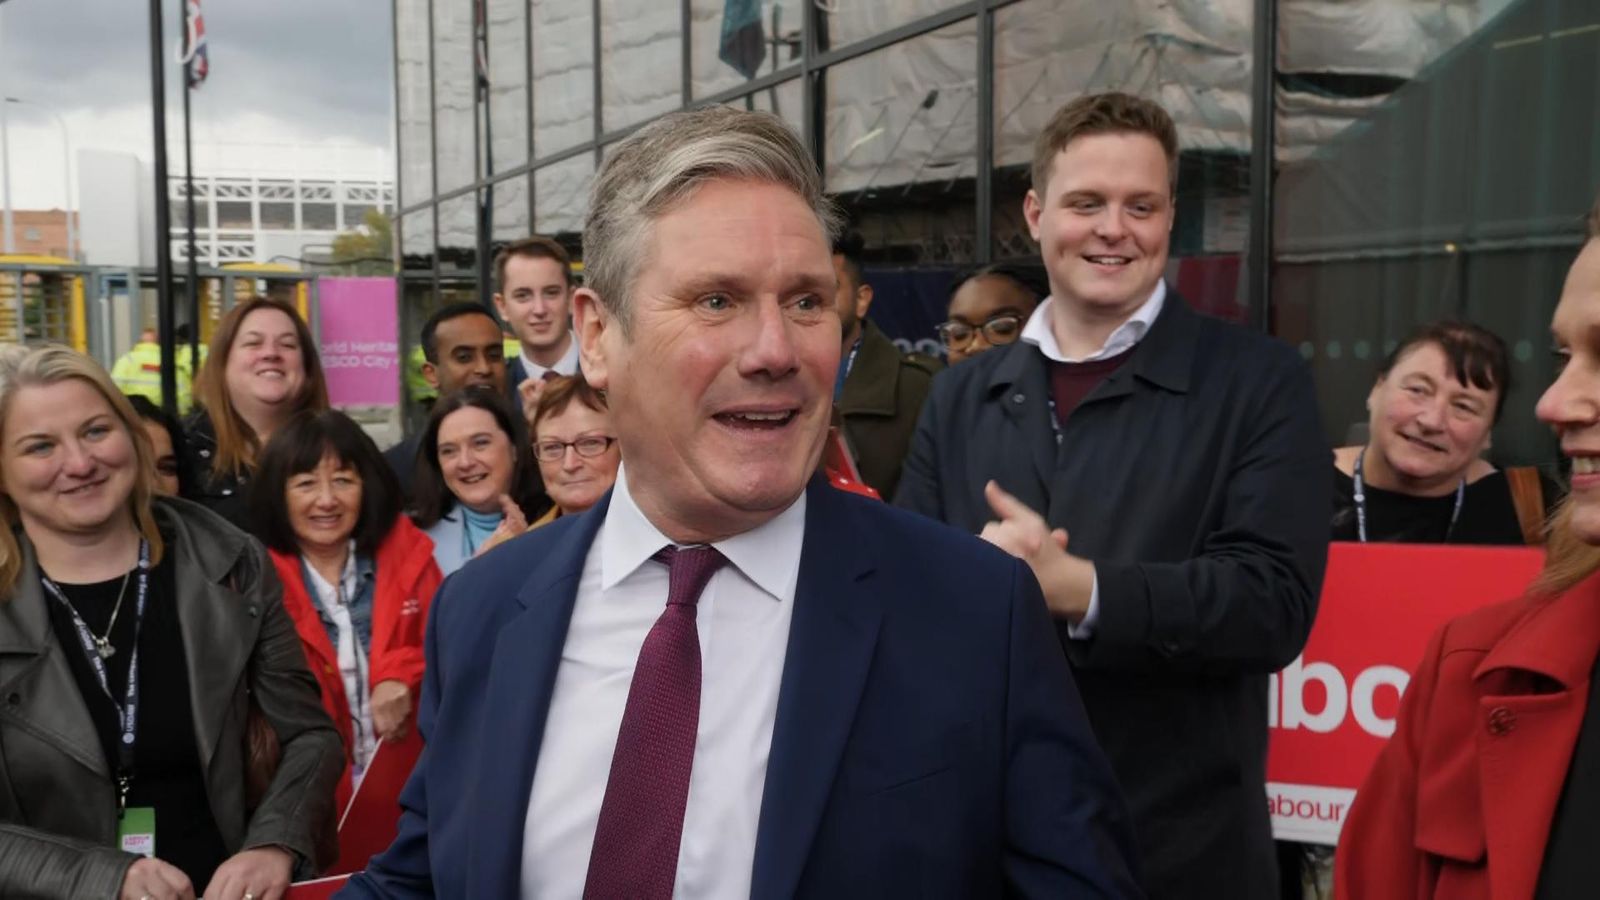 Keir Starmer says he will reverse tax cut for top earners